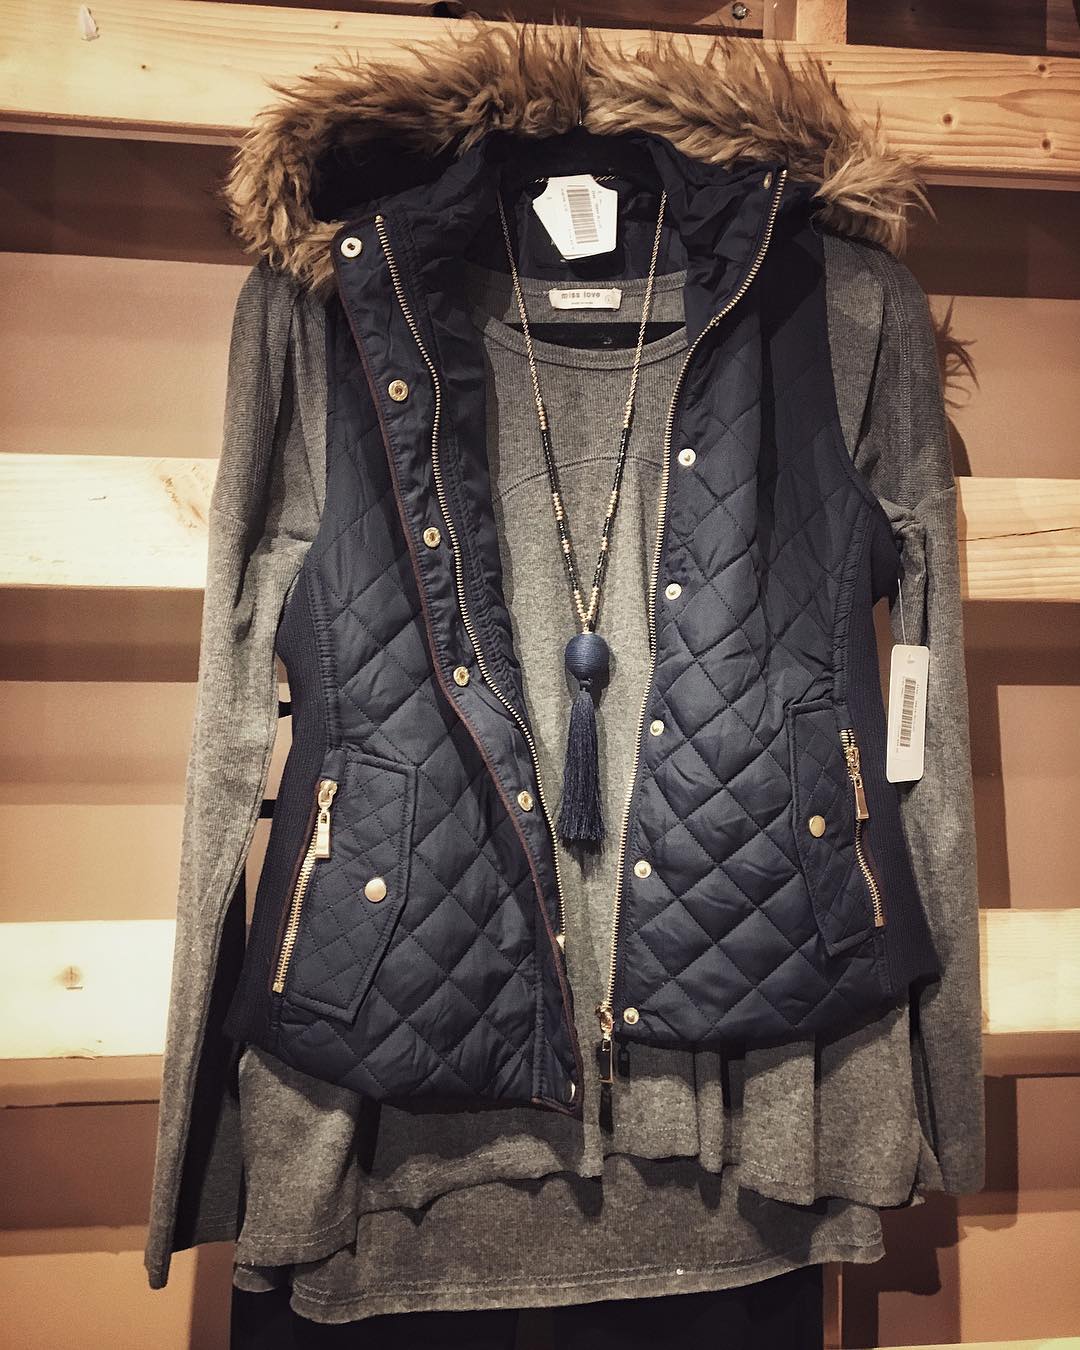 Lovin this hooded vest with faux fur lining